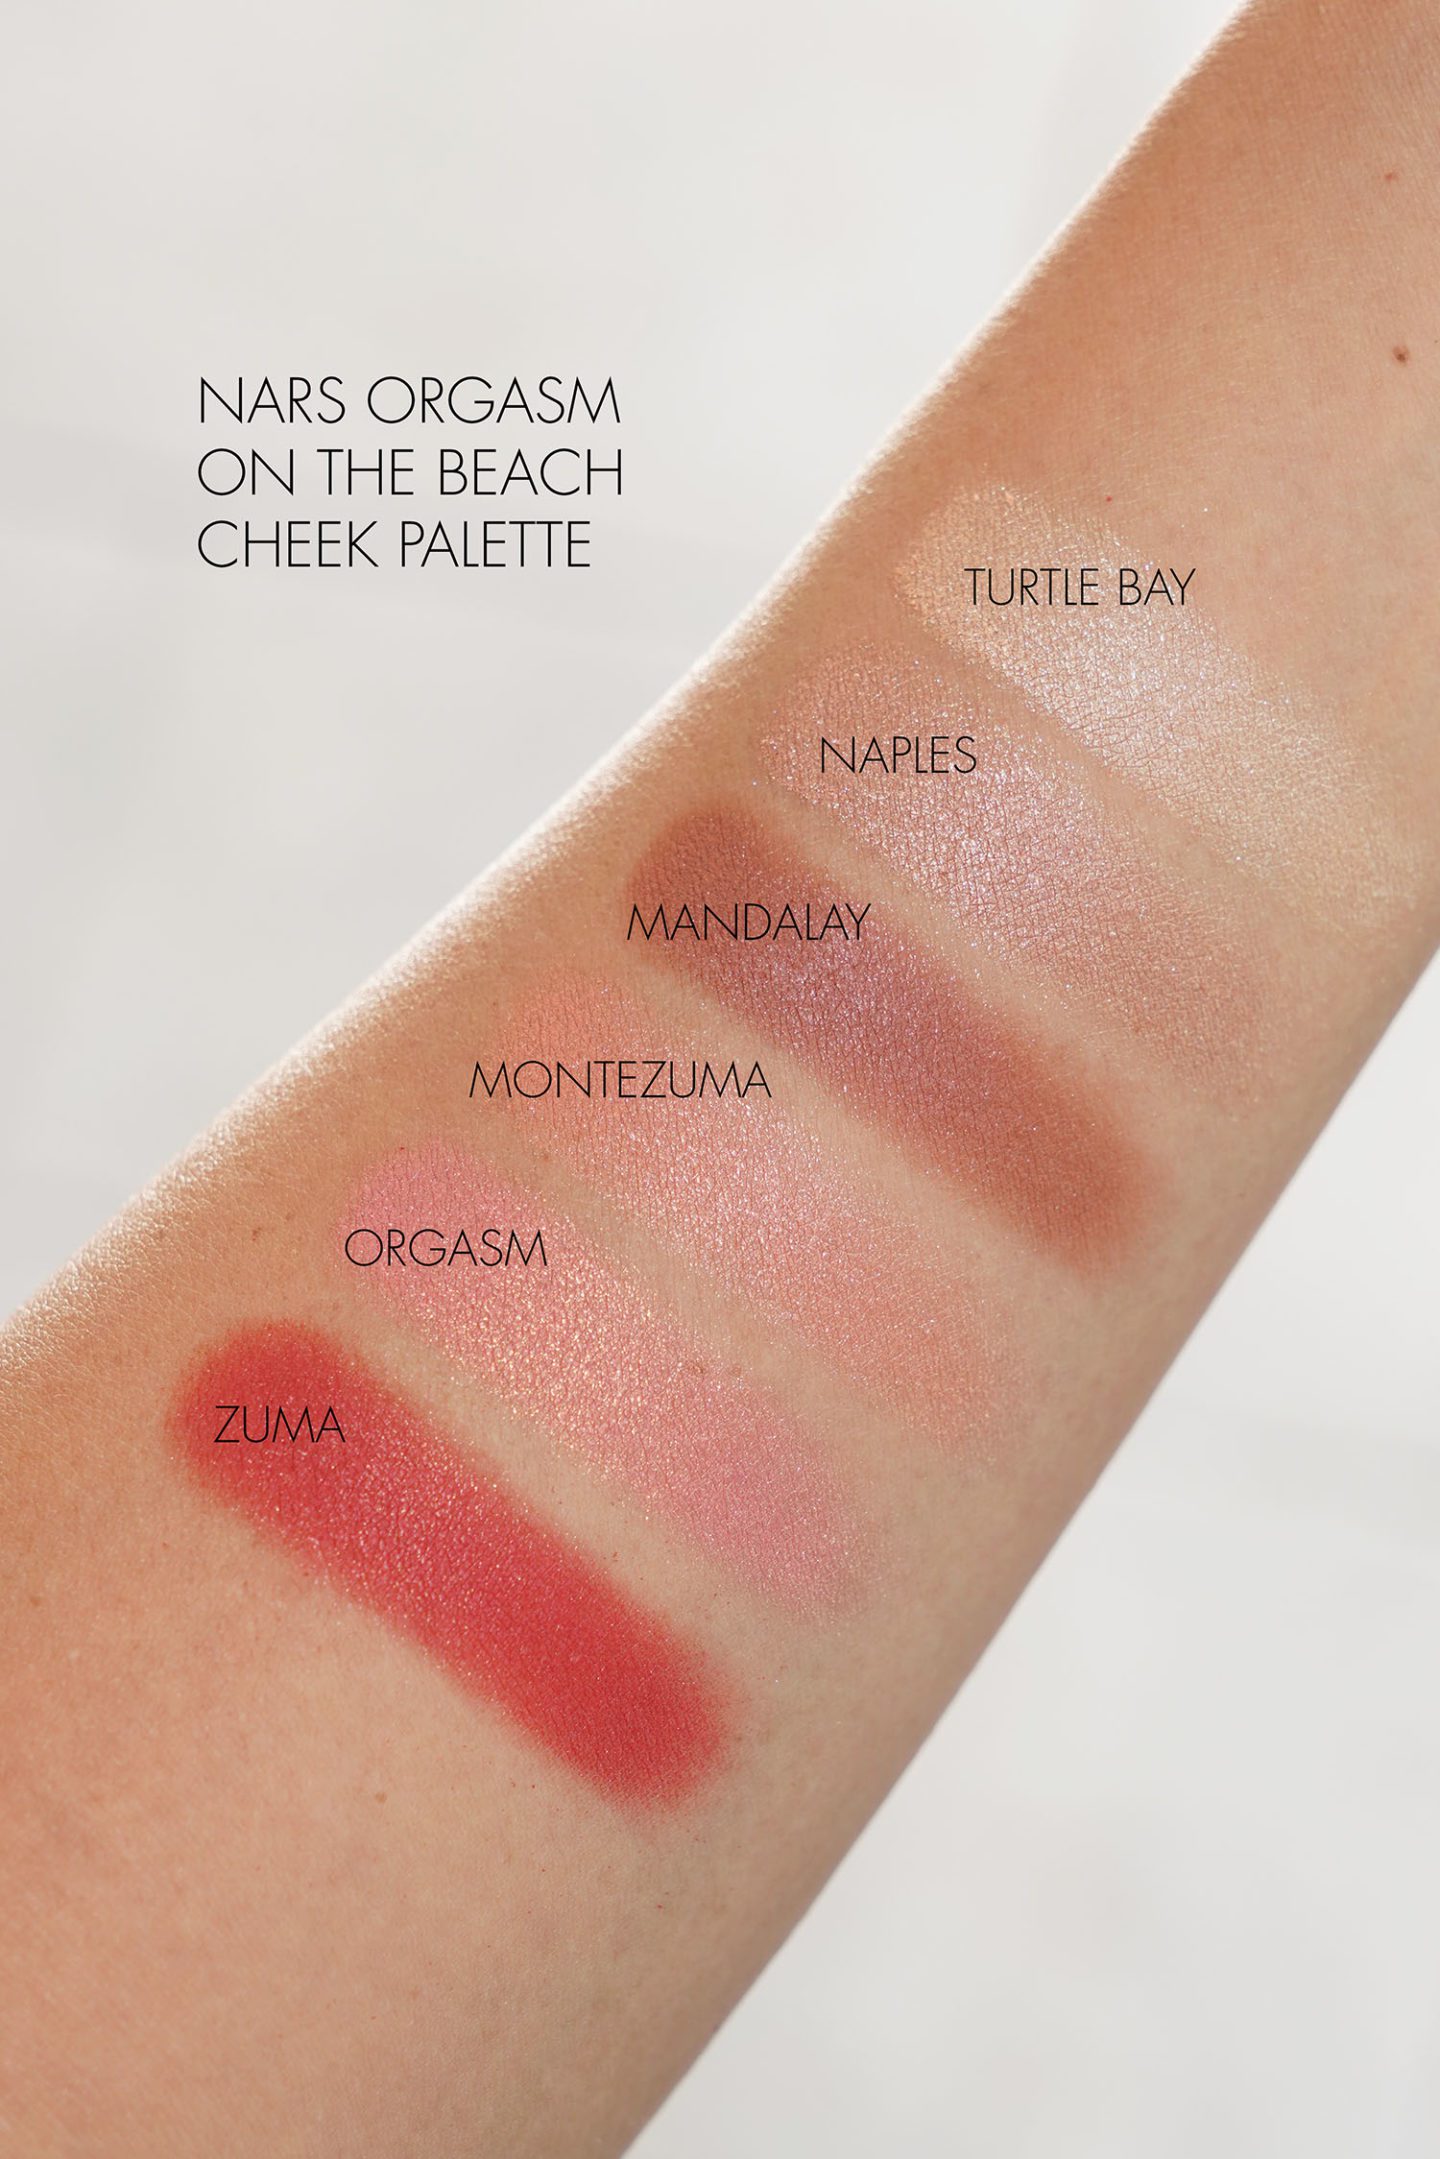 NARS Orgasm on the Beach palette swatches